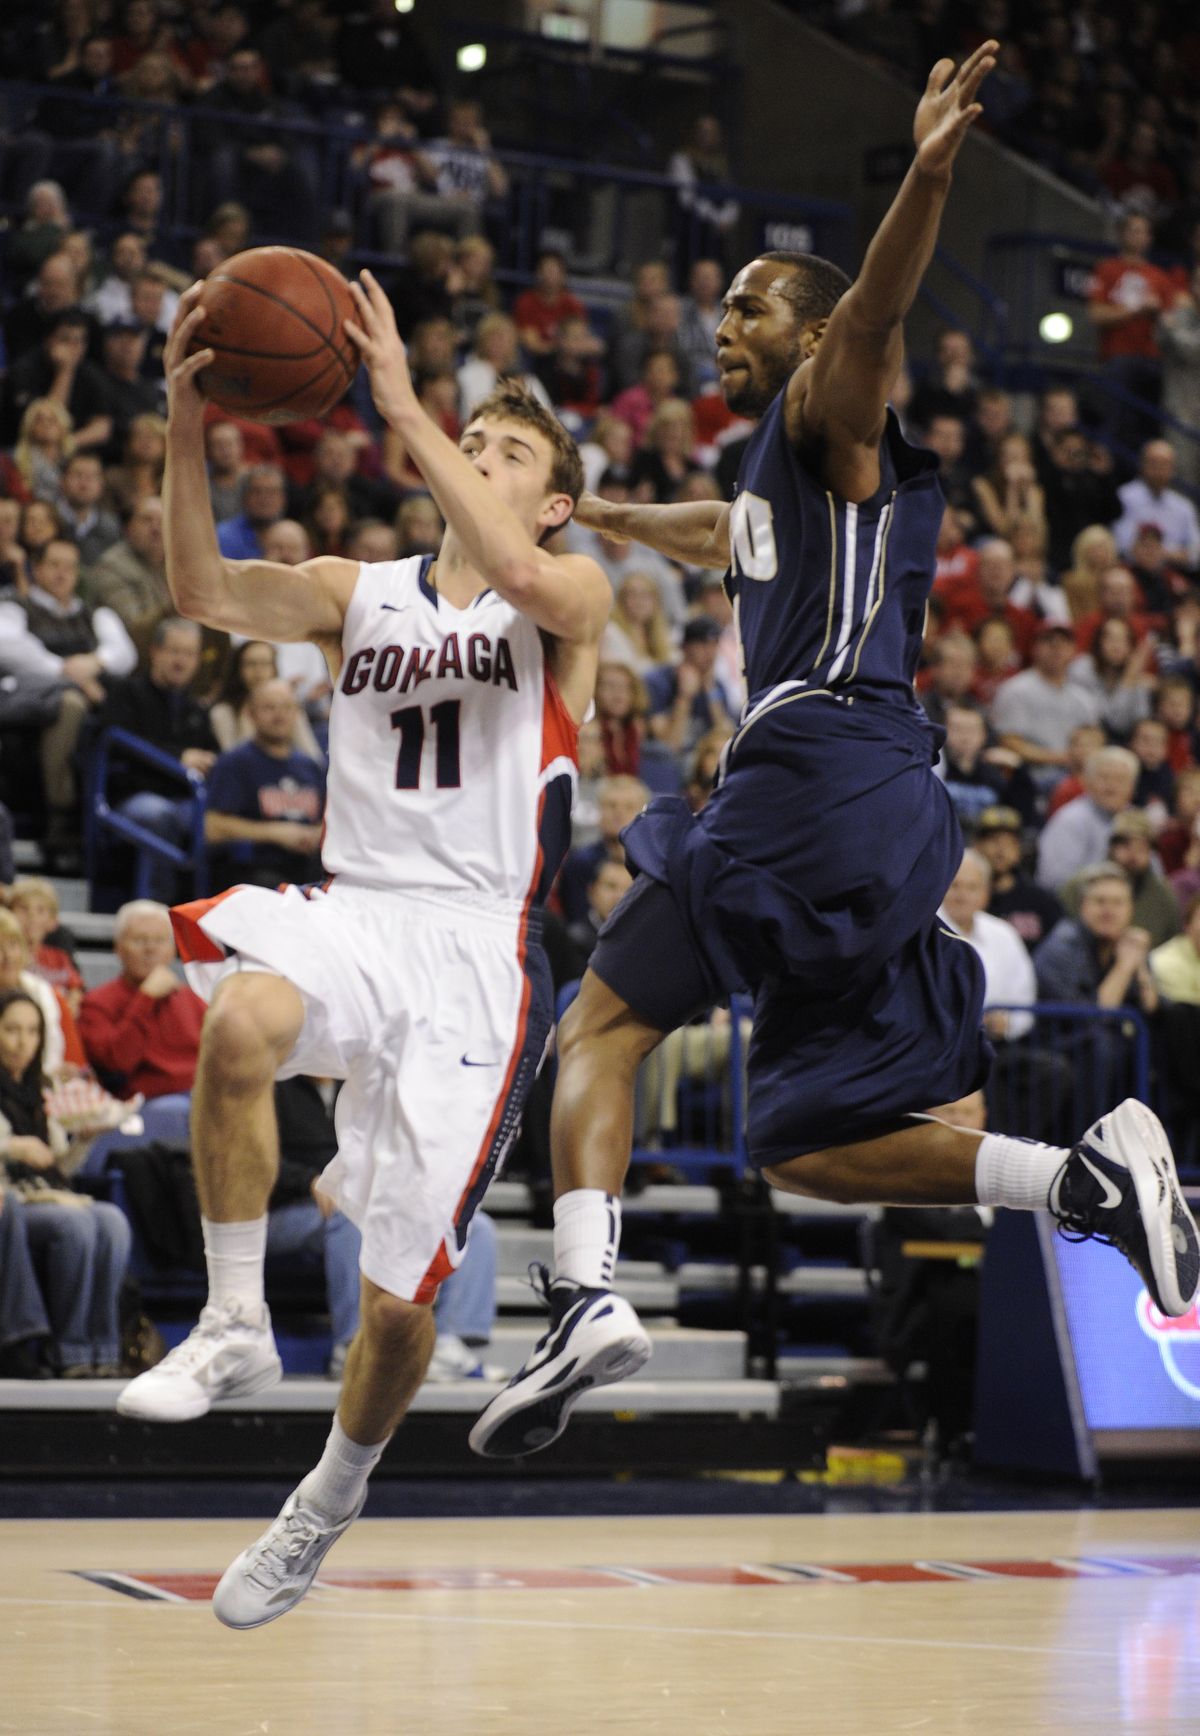 Gonzaga’s David Stockton heads to the basket as Oral Roberts’ Roderick Pearson Jr. defends. (Colin Mulvany)